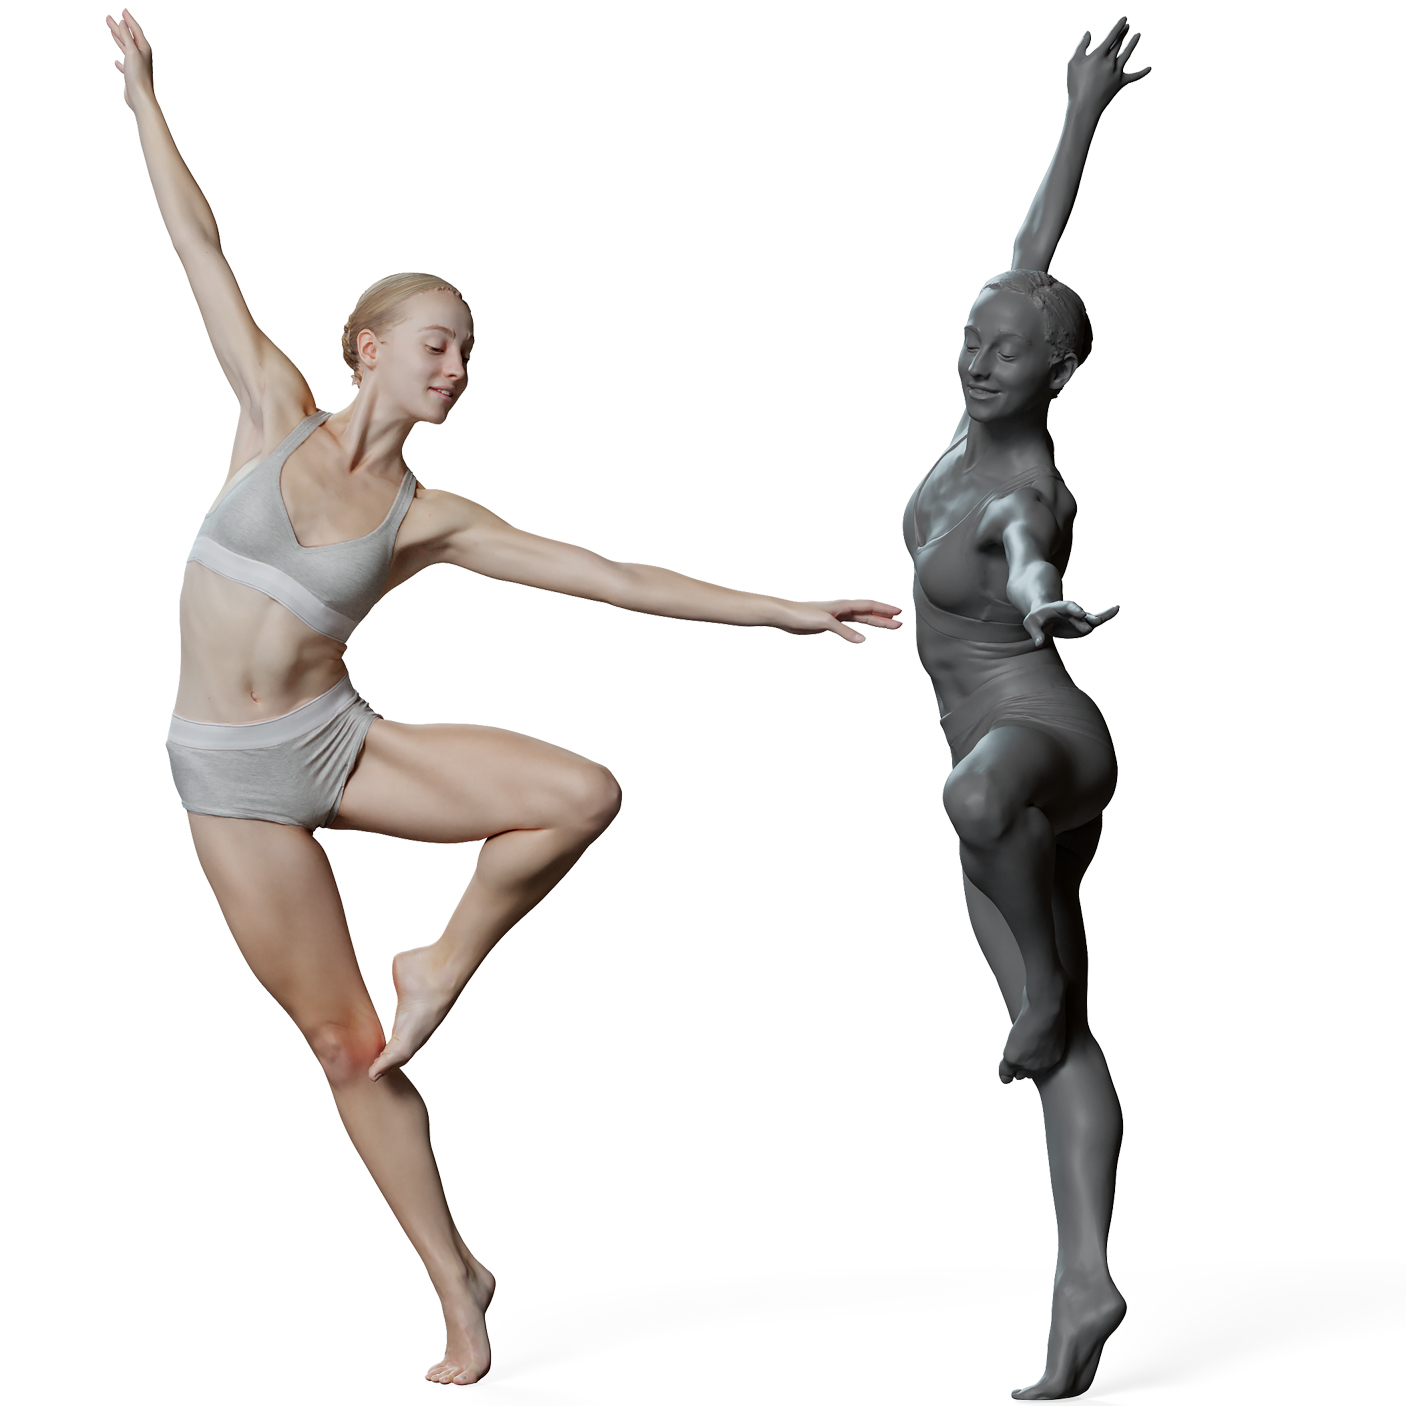 Human Female Skeleton Dancing Poses Collection 01 - 15 models 3D -  TurboSquid 1948218